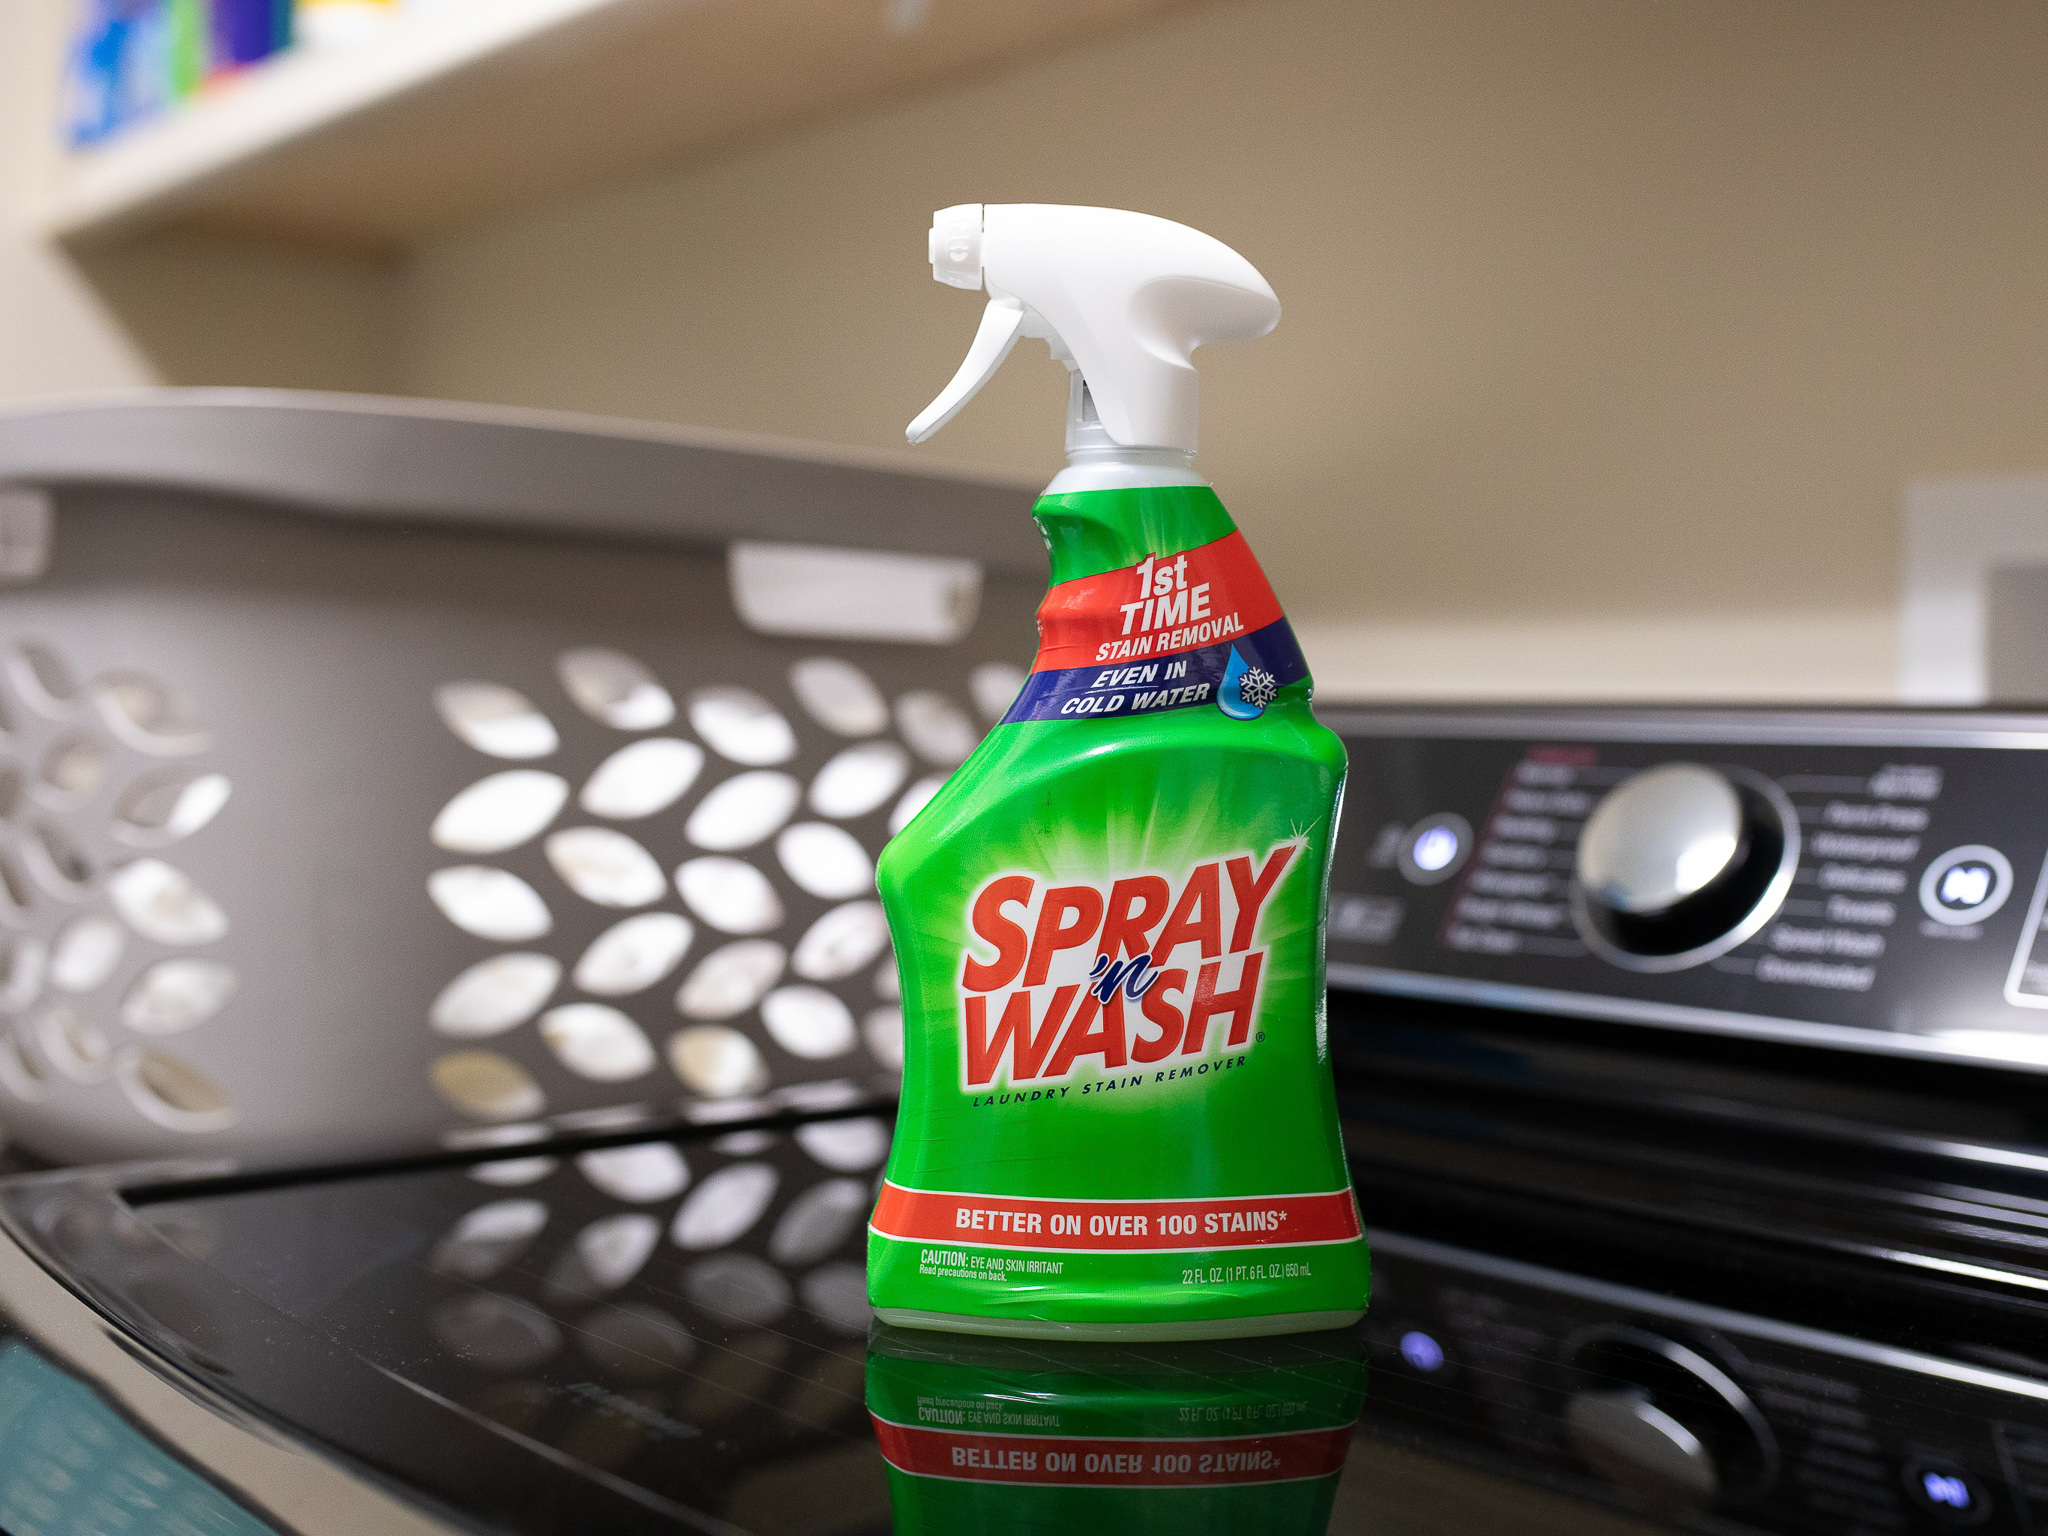 Spray ‘N Wash Laundry Stain Remover As Low As $1.99 At Kroger